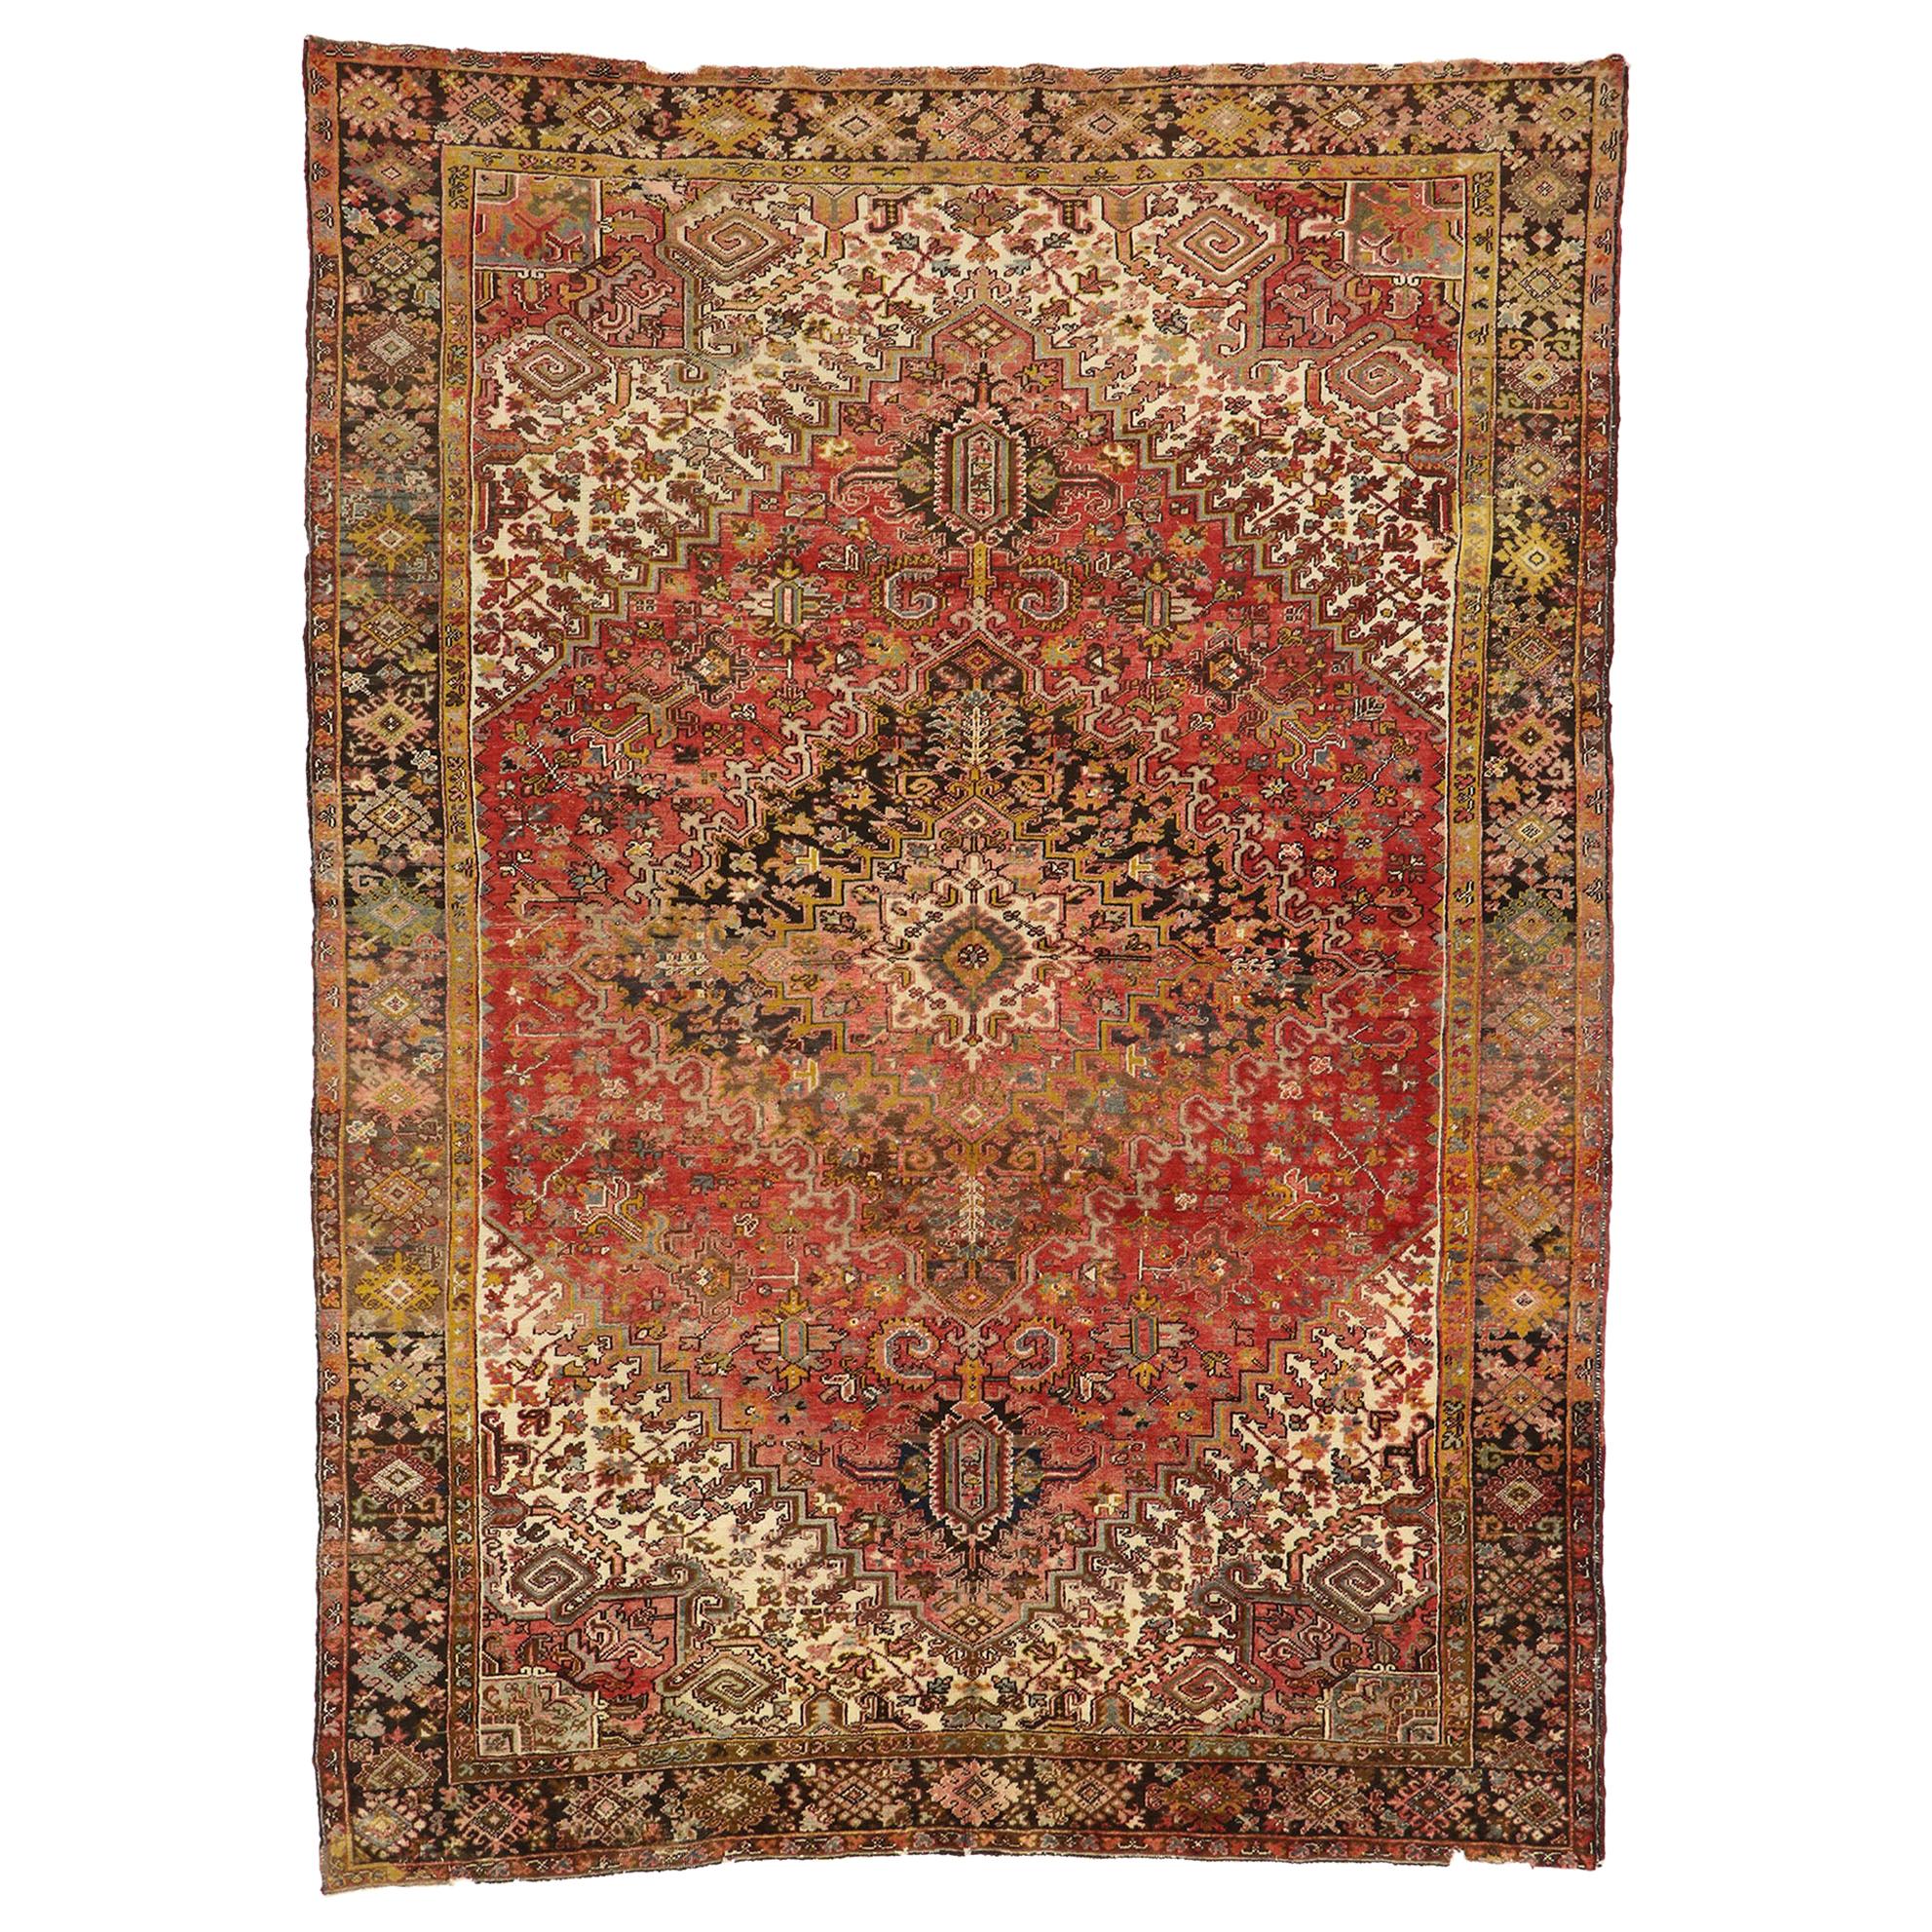 Antique Persian Heriz Area Rug with Mid-Century Modern Style